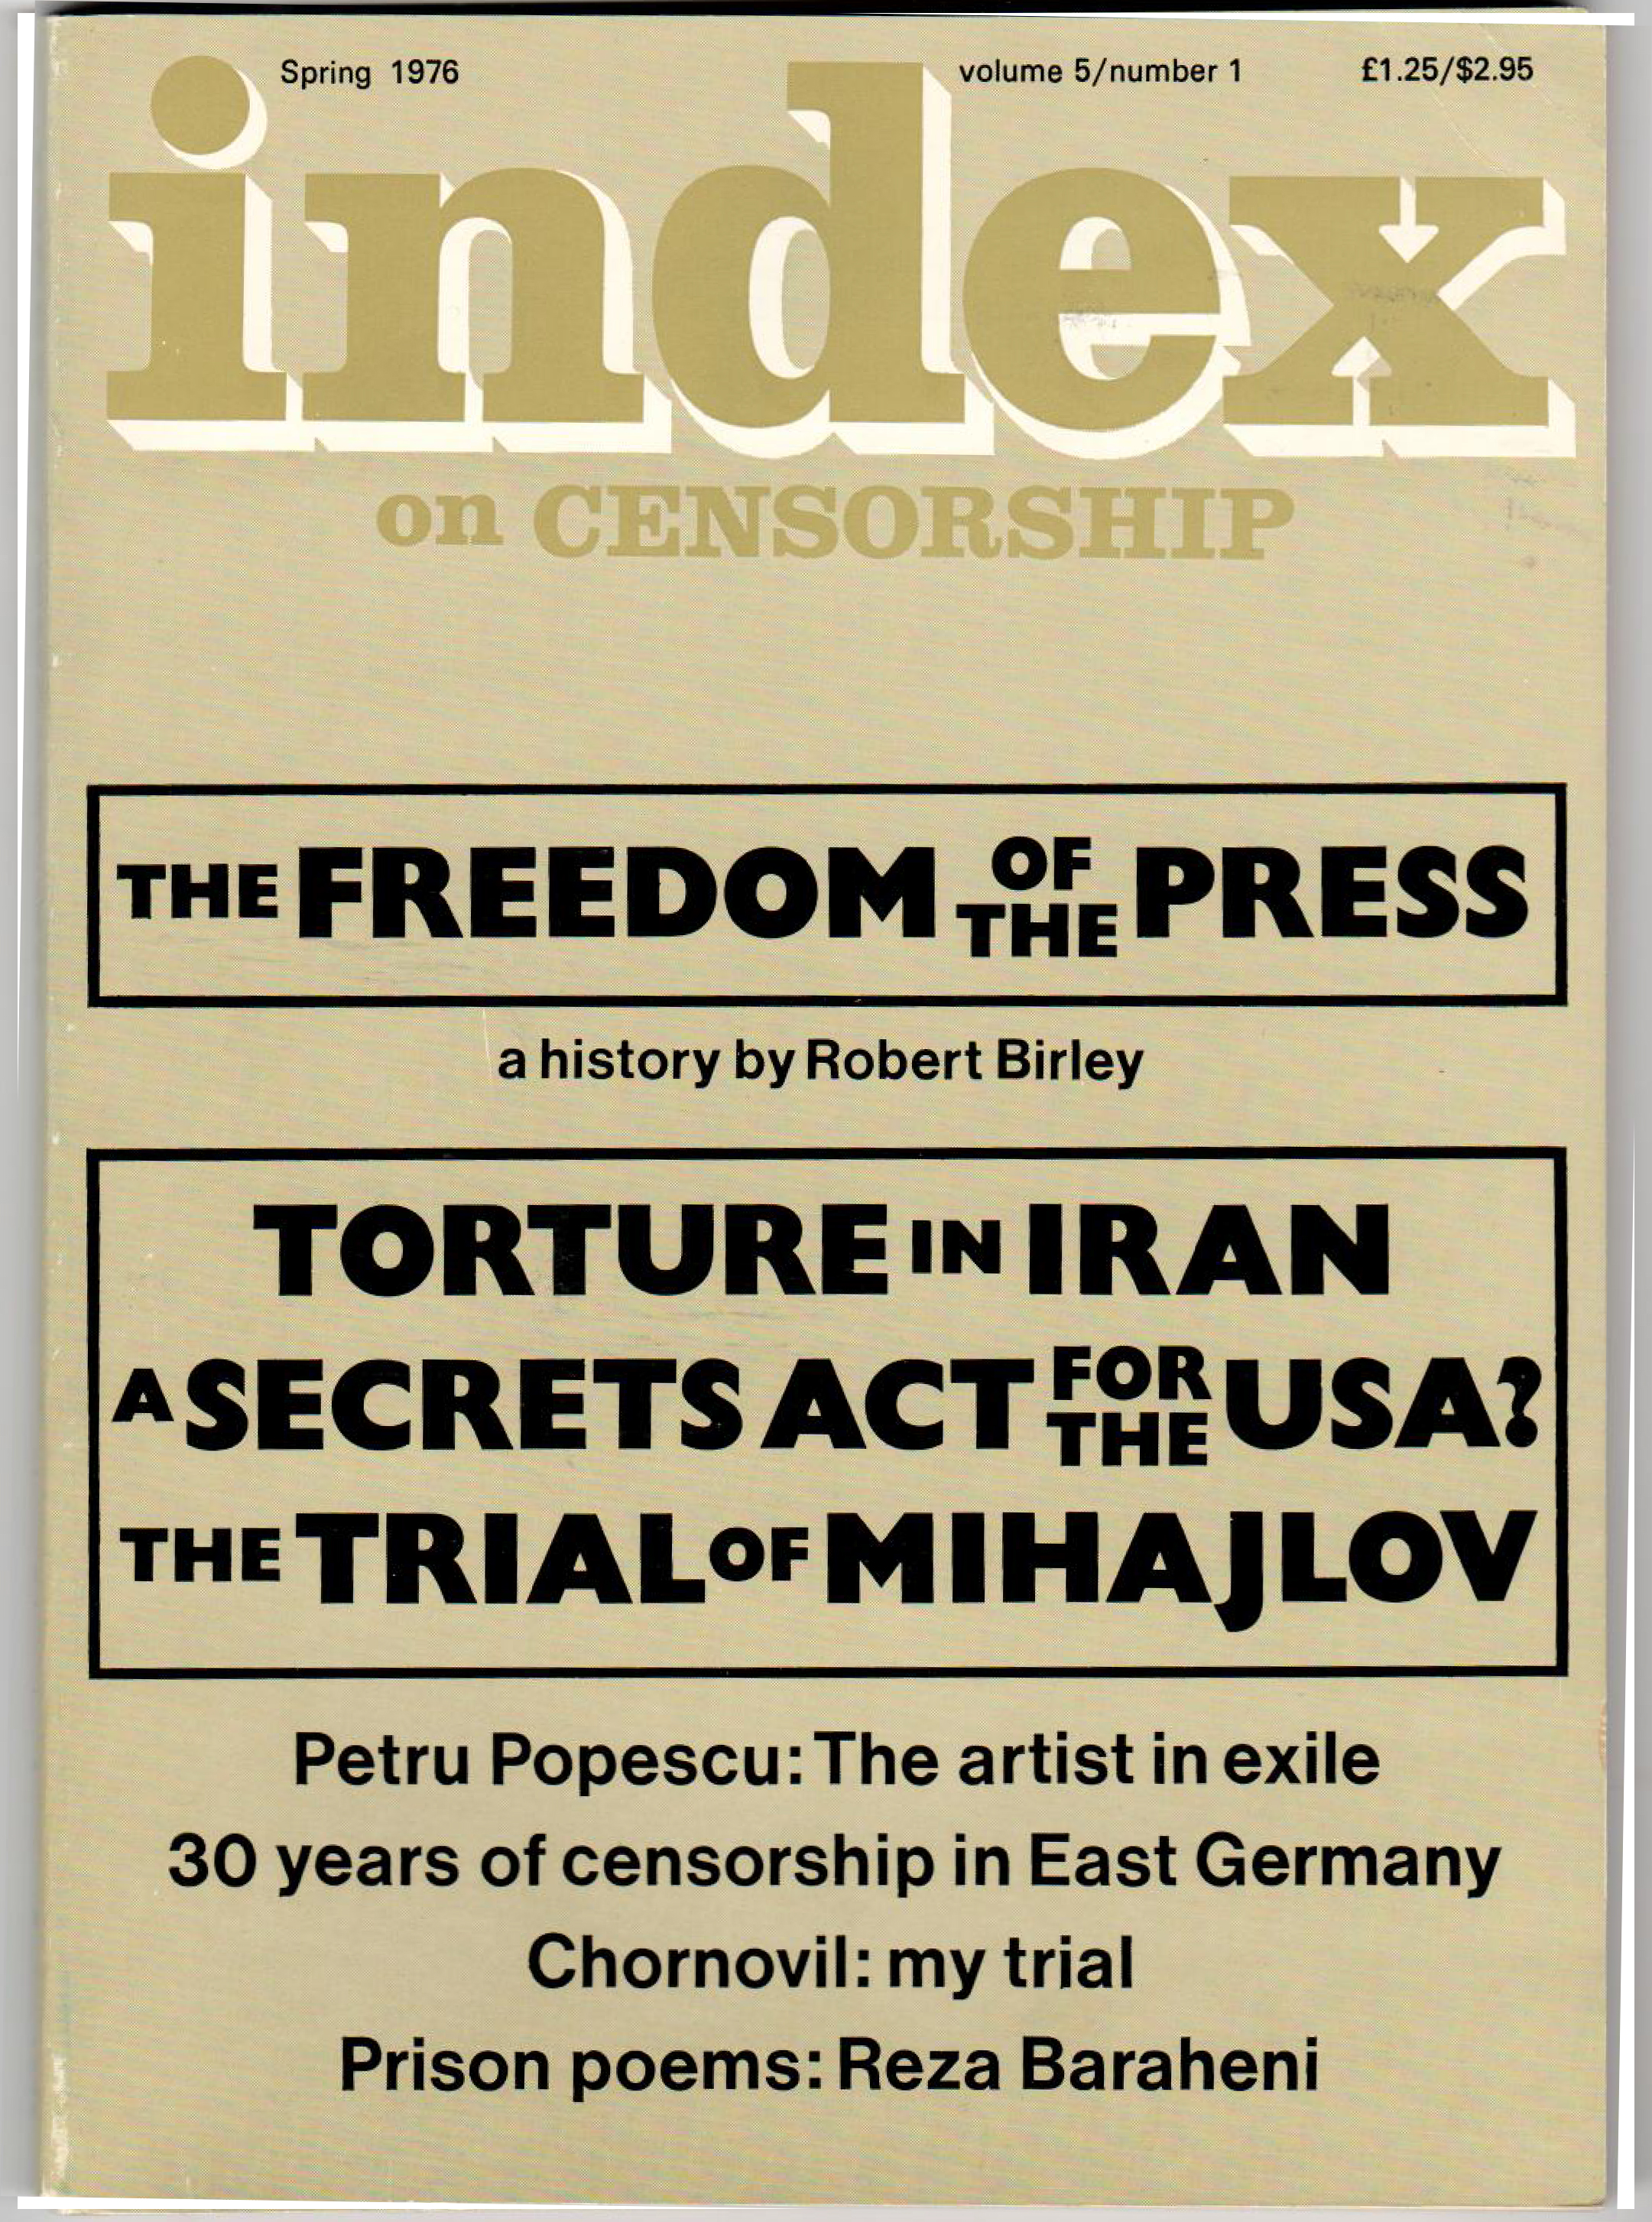 The Freedom of the press, the Spring 1976 issue of Index of Censorship magazine